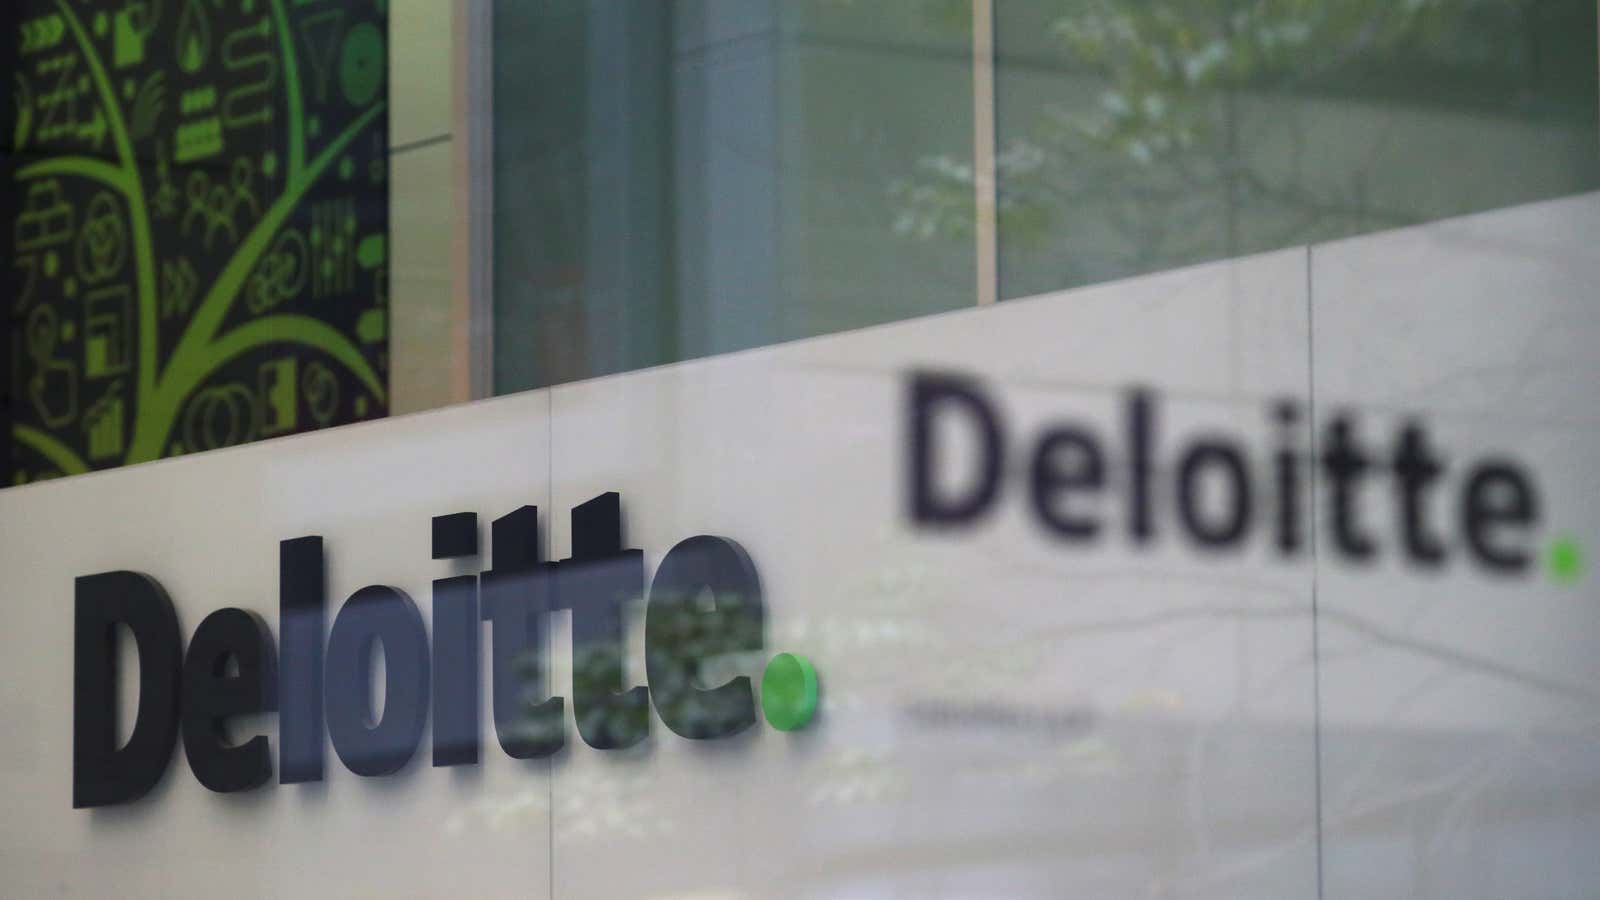 Deloitte allegedly signed off on the books of a $350 million Ponzi scheme.